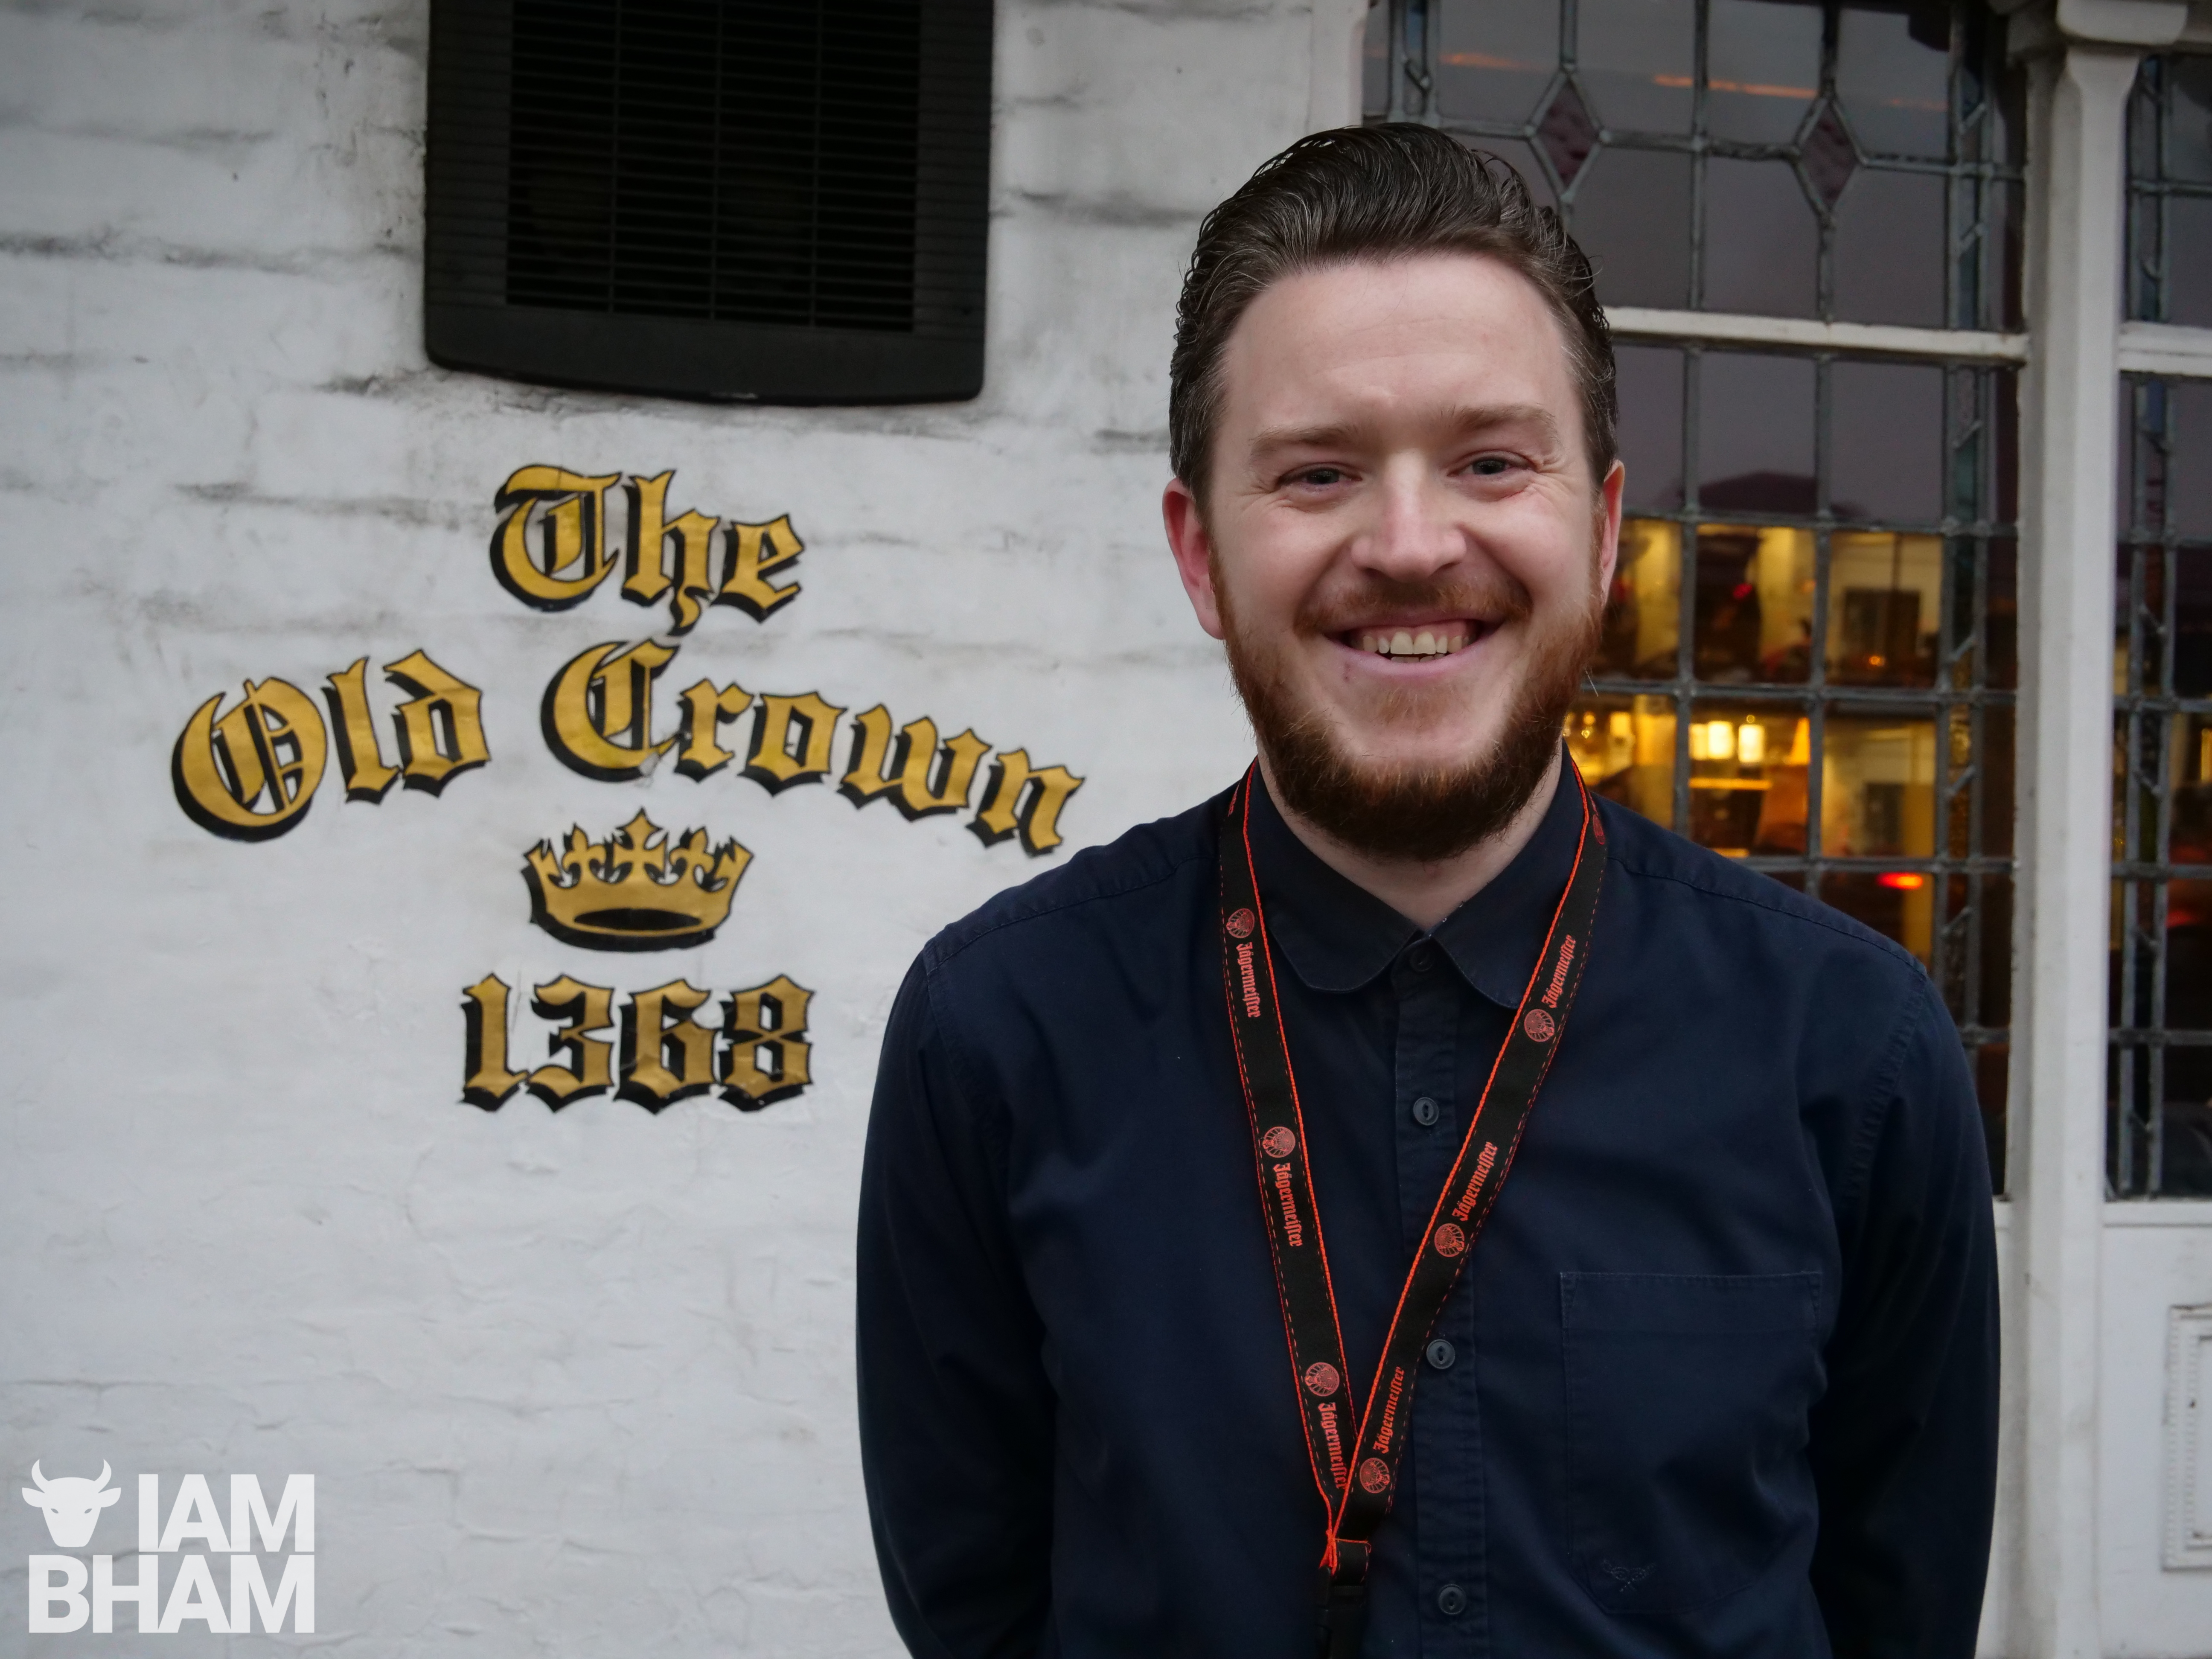 Matt Deakin from The Old Crown Pub, where staff will be providing a full festive meal to the homeless and vulnerable on Christmas Eve